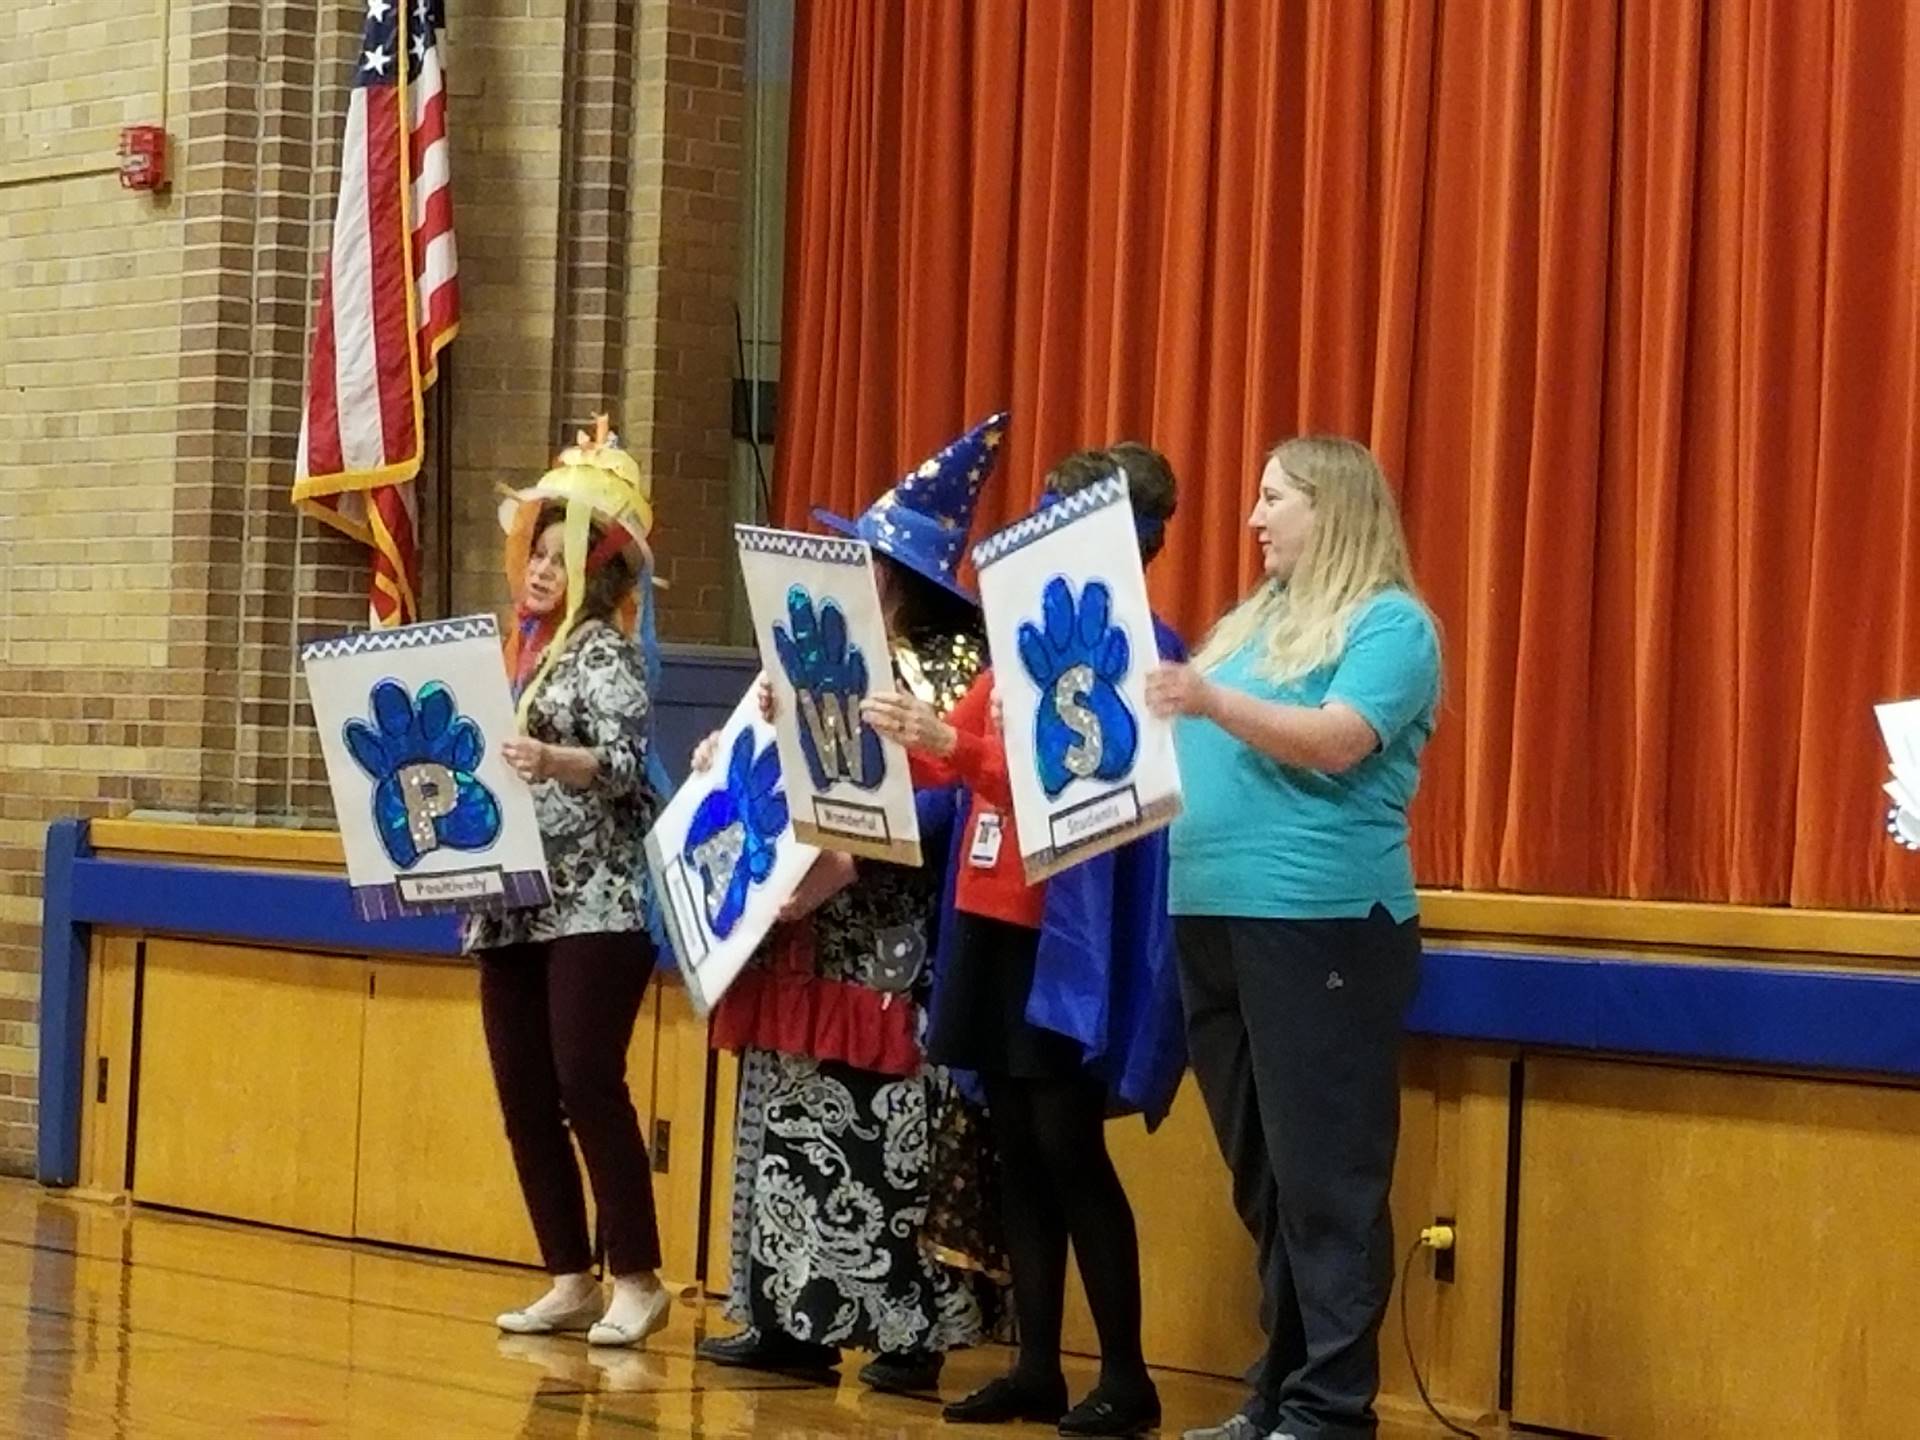 Adults holding "PAWS" sign